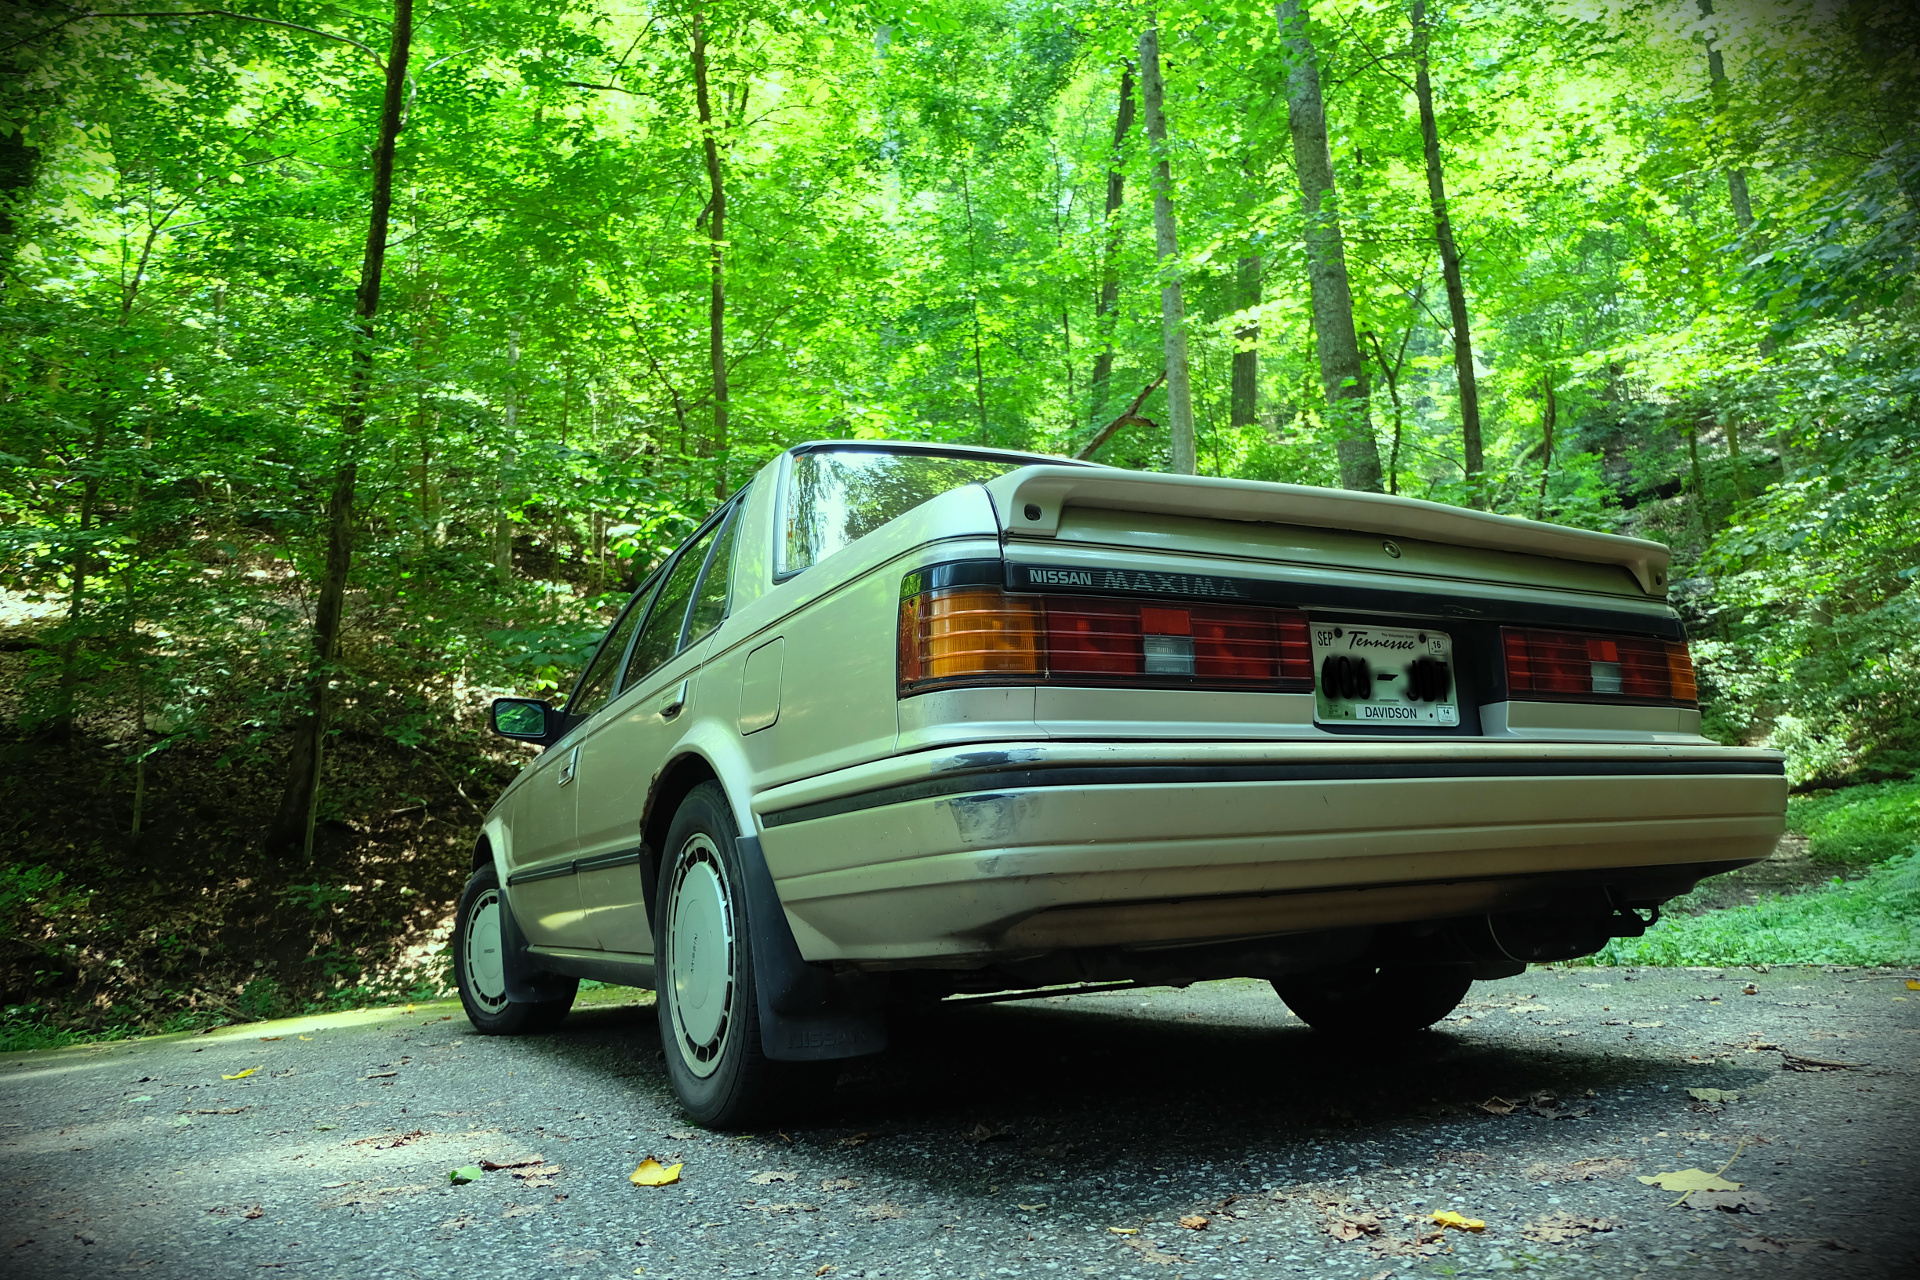 This Love Affair With A 1987 Nissan Maxima Has Lasted 27 Years